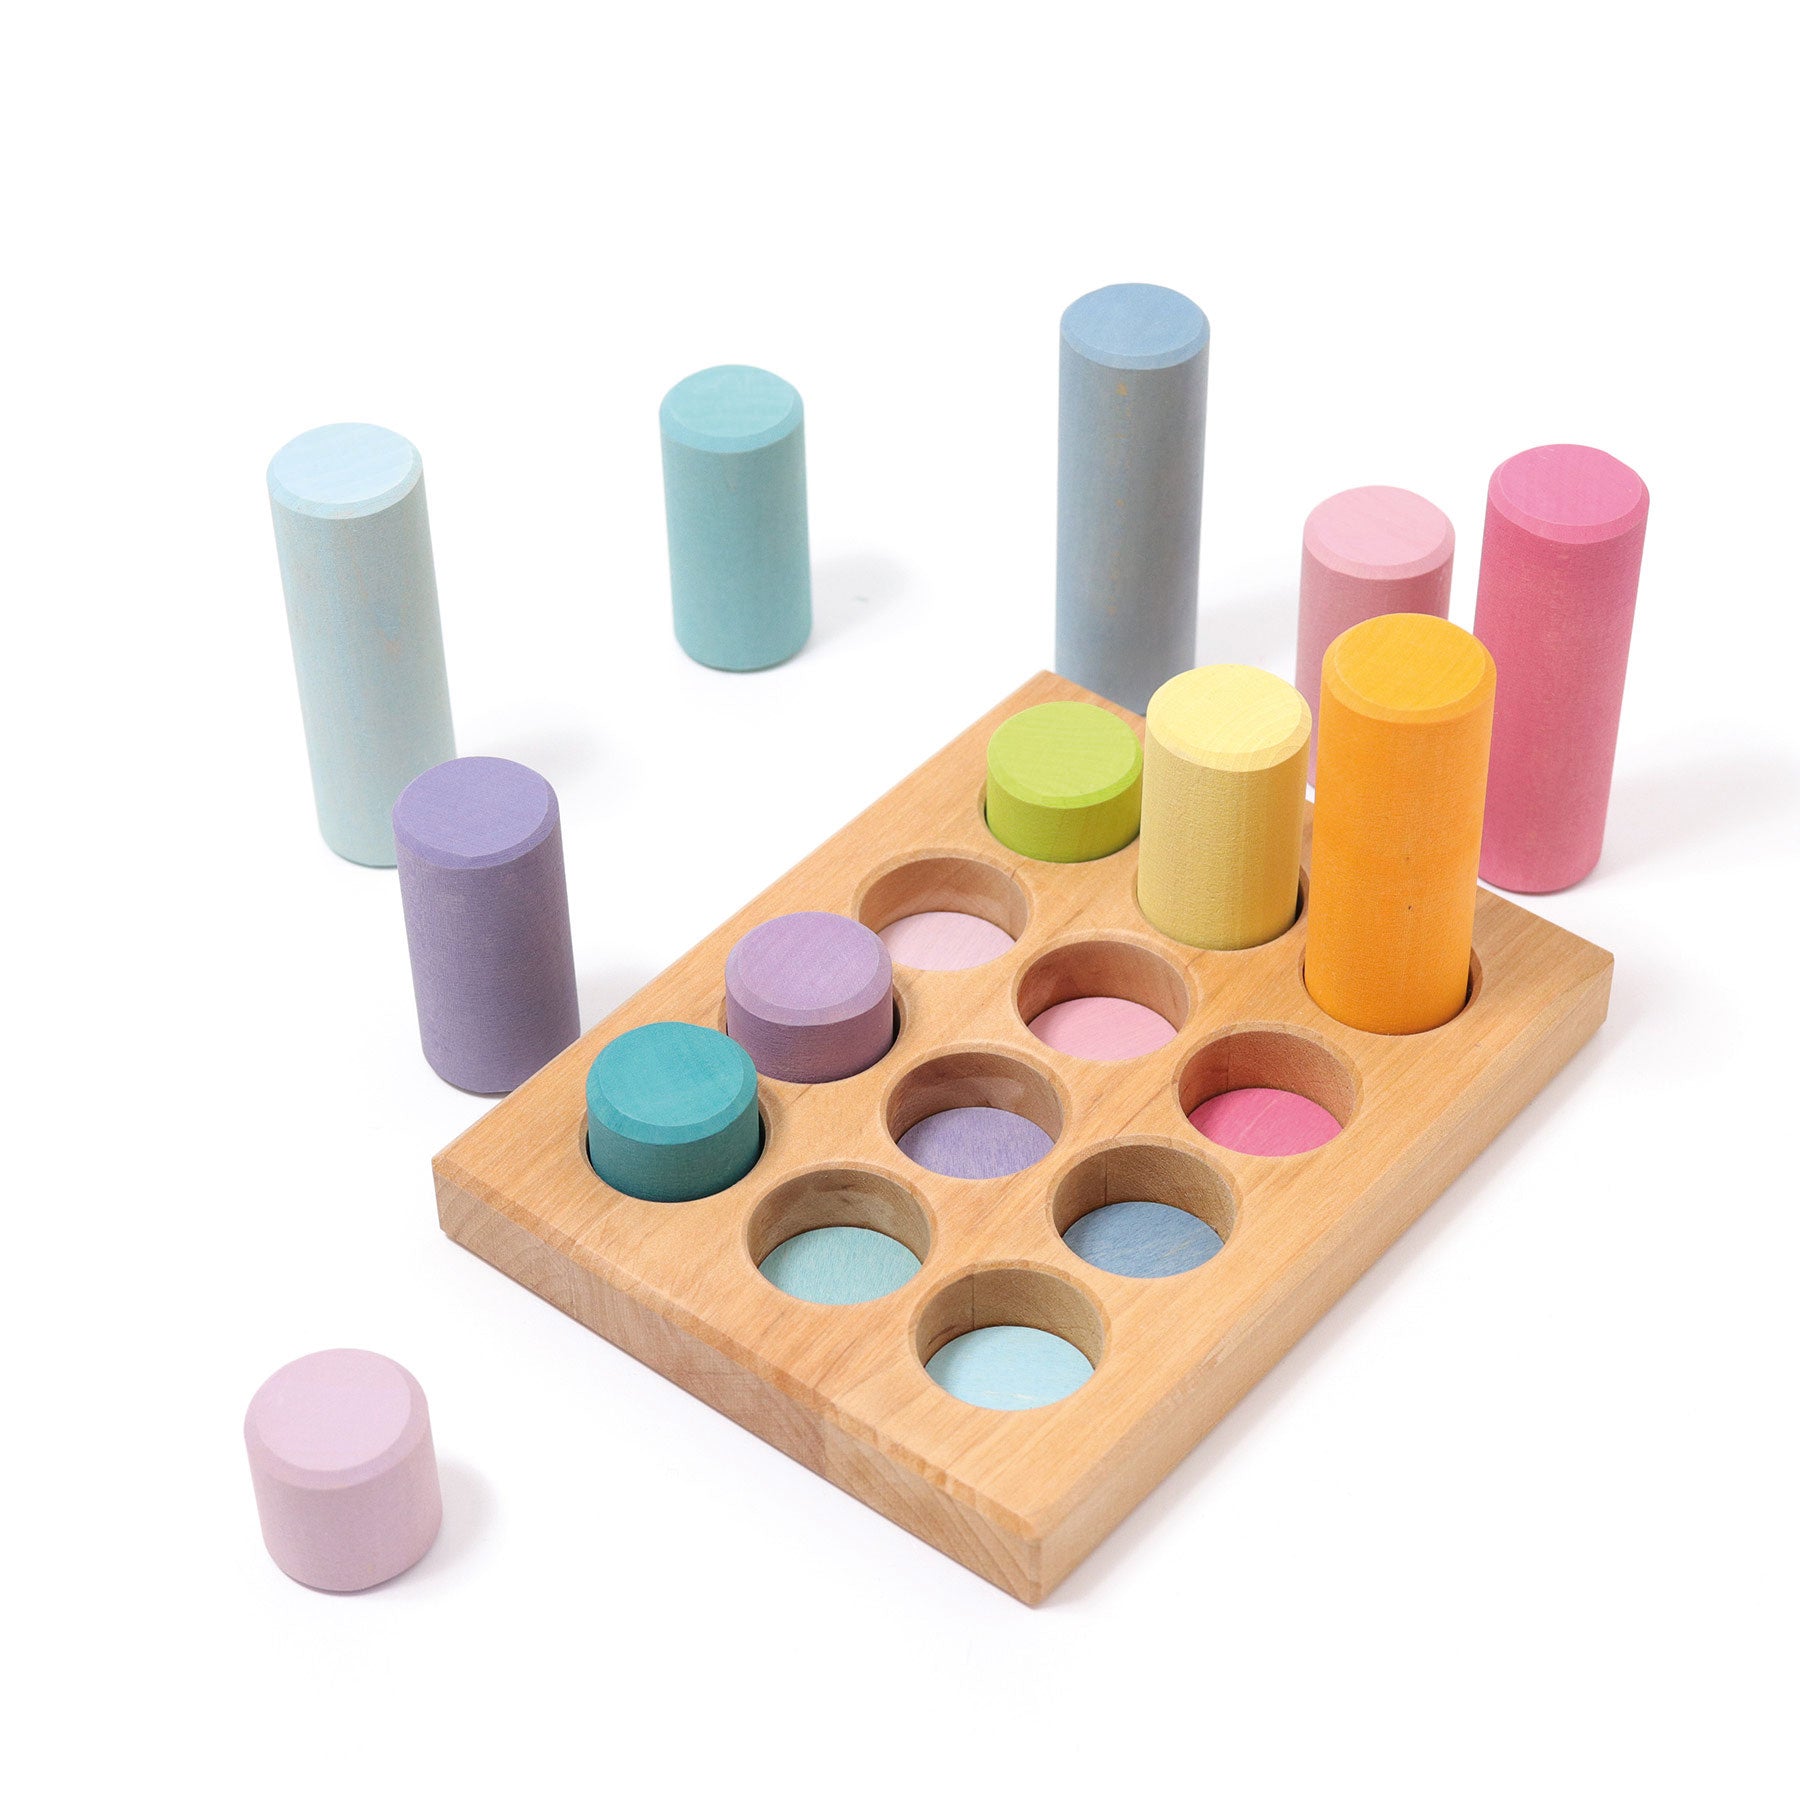 Grimm’s Rollers Small Pastel Sorting Game | Wooden Building Sets | Children of the Wild